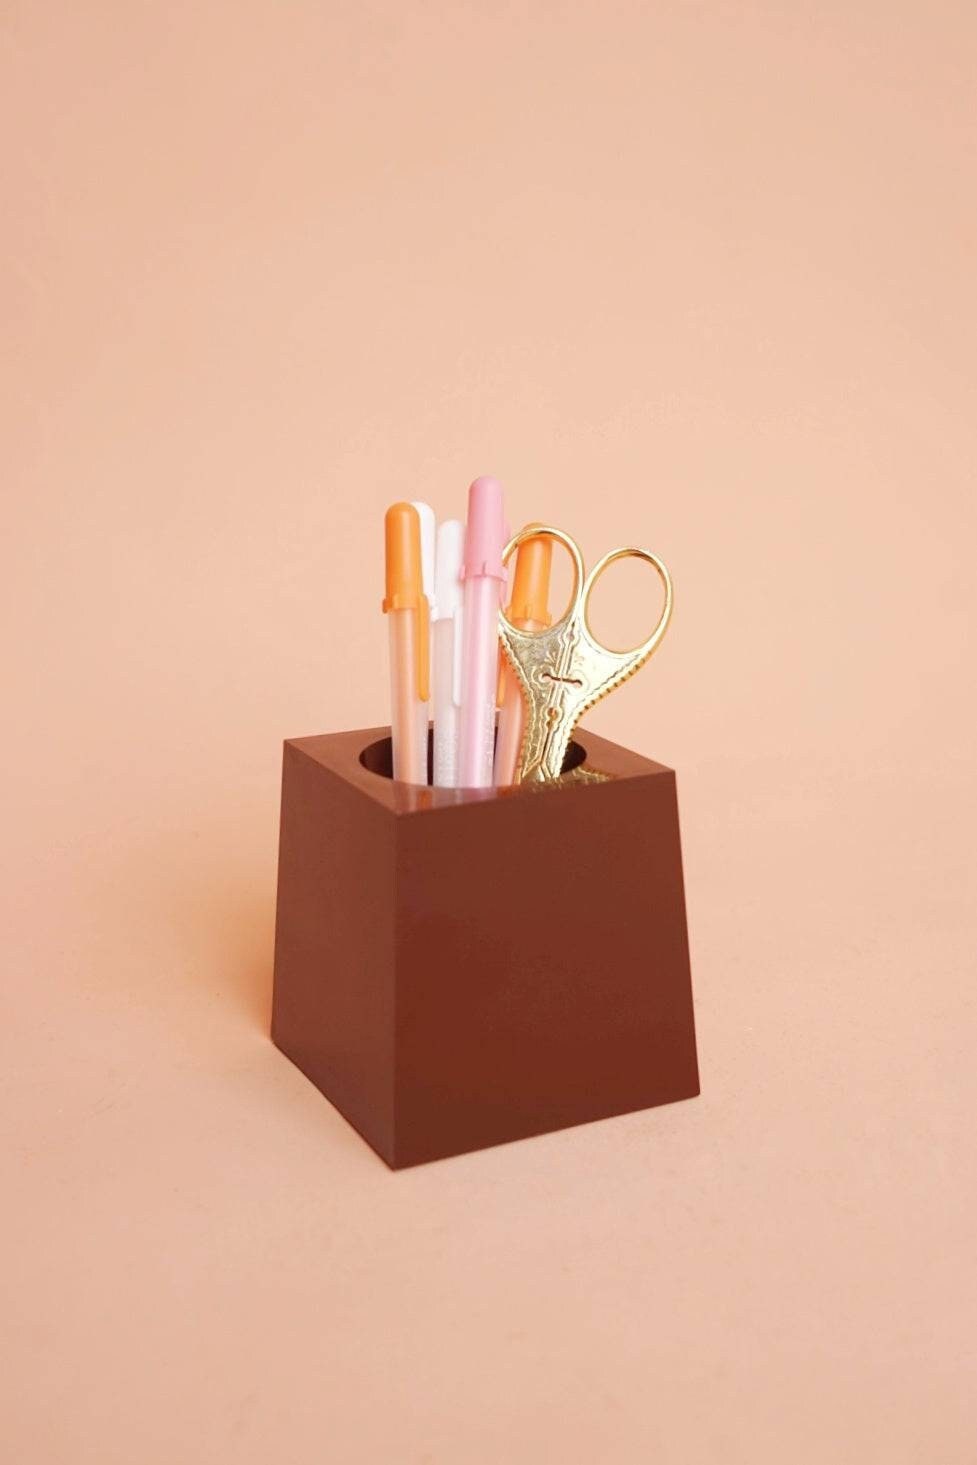 Plastic MOD Desk Caddy Organizer for Pens and Pencils Office 